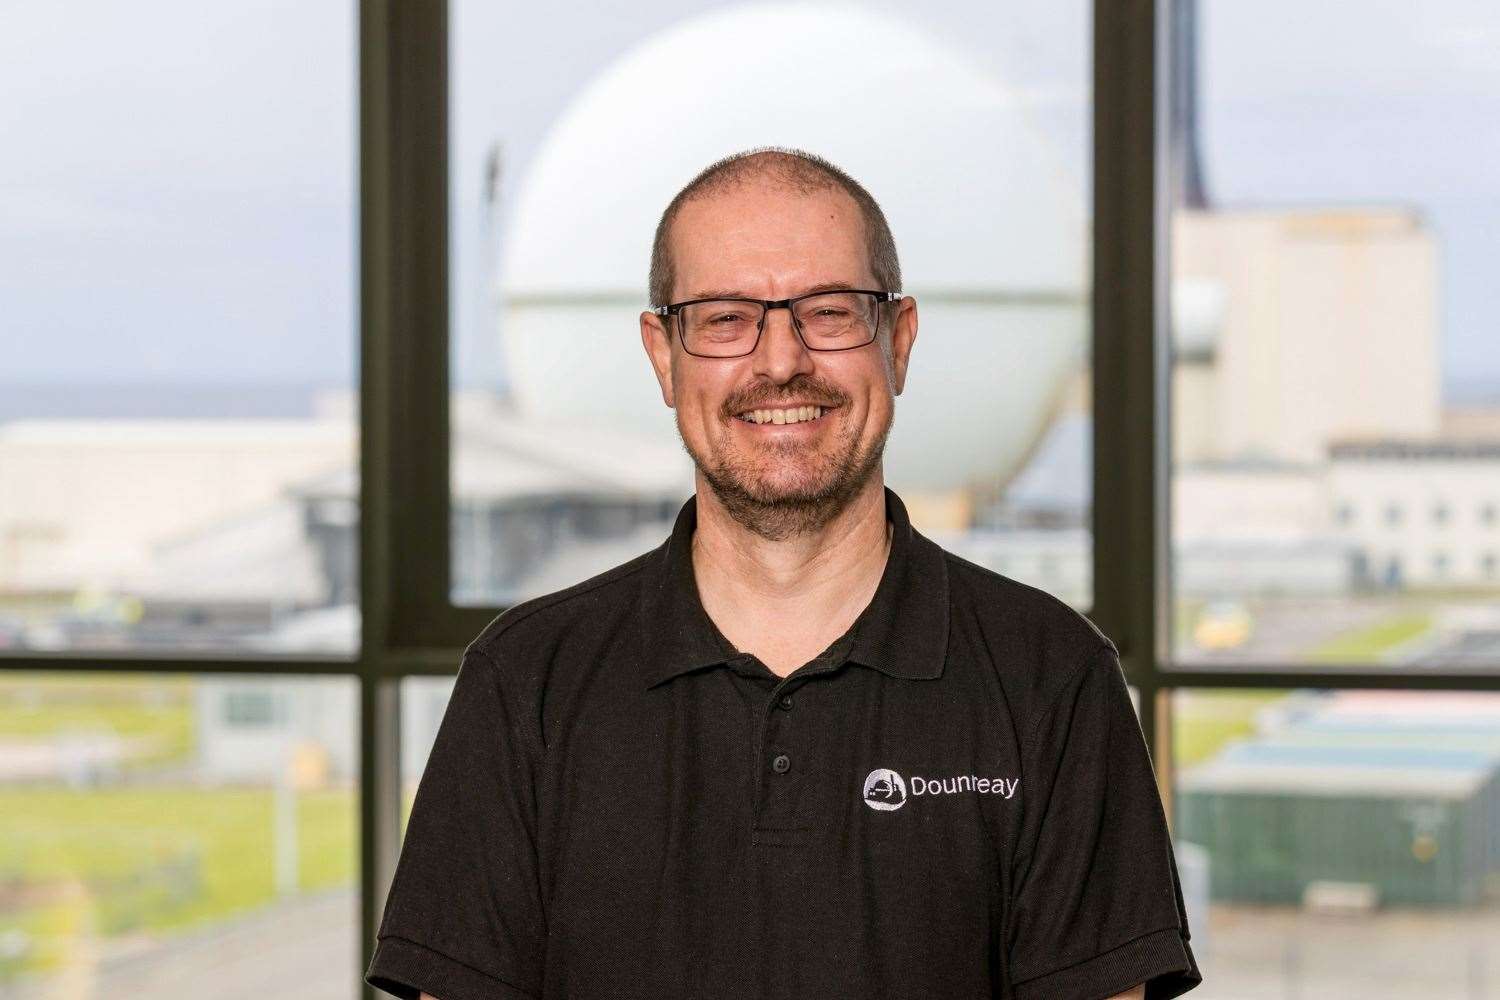 Mark Rouse took up the position of Dounreay managing director in March 2020. He said he was 'proud of everything we have achieved together'.